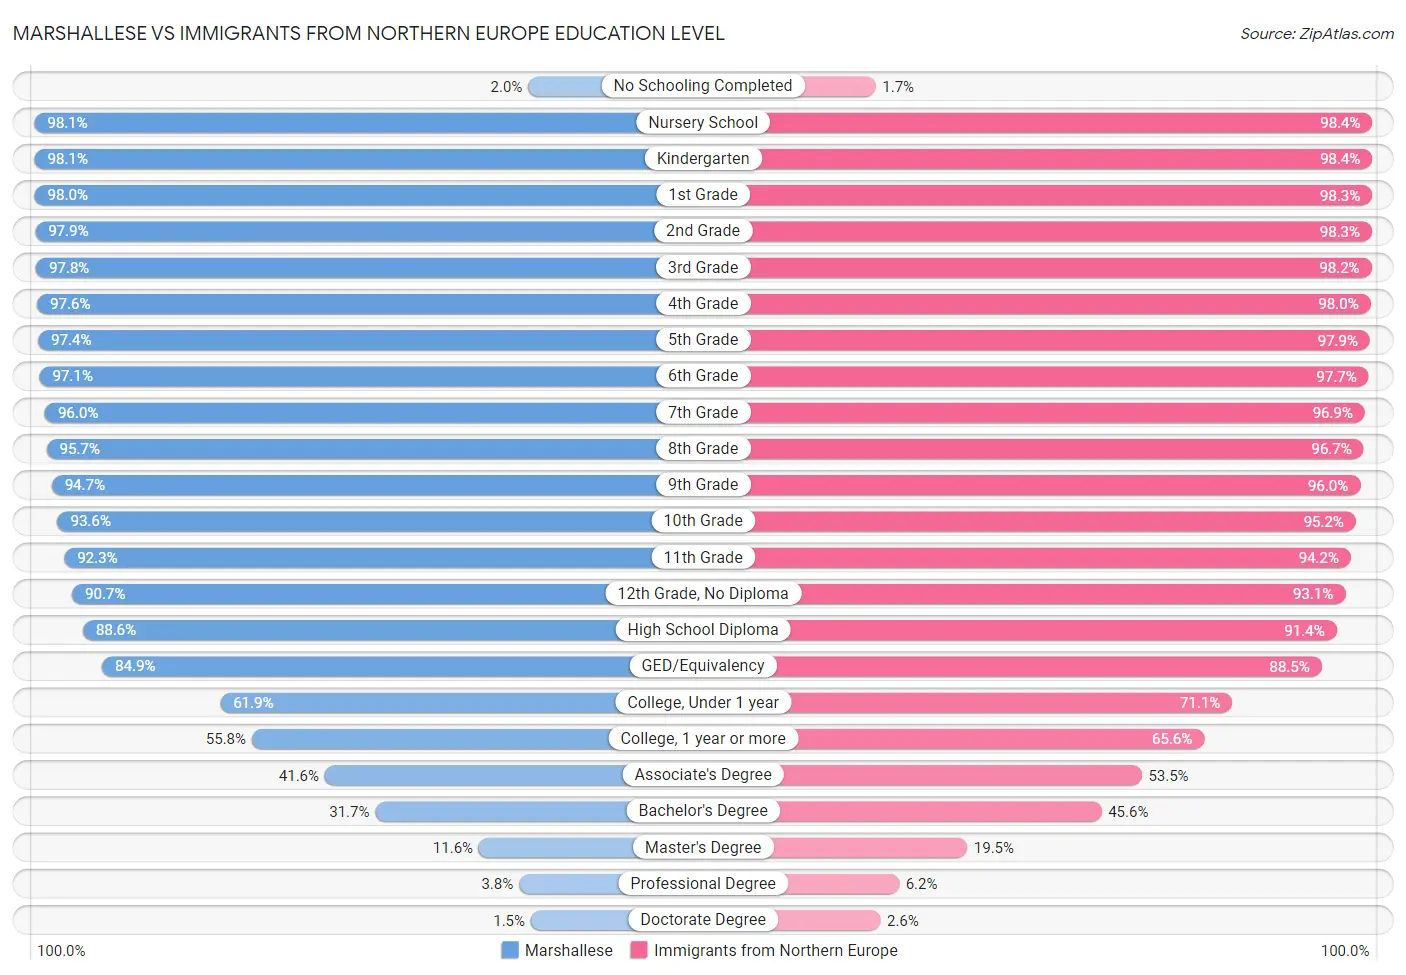 Marshallese vs Immigrants from Northern Europe Education Level